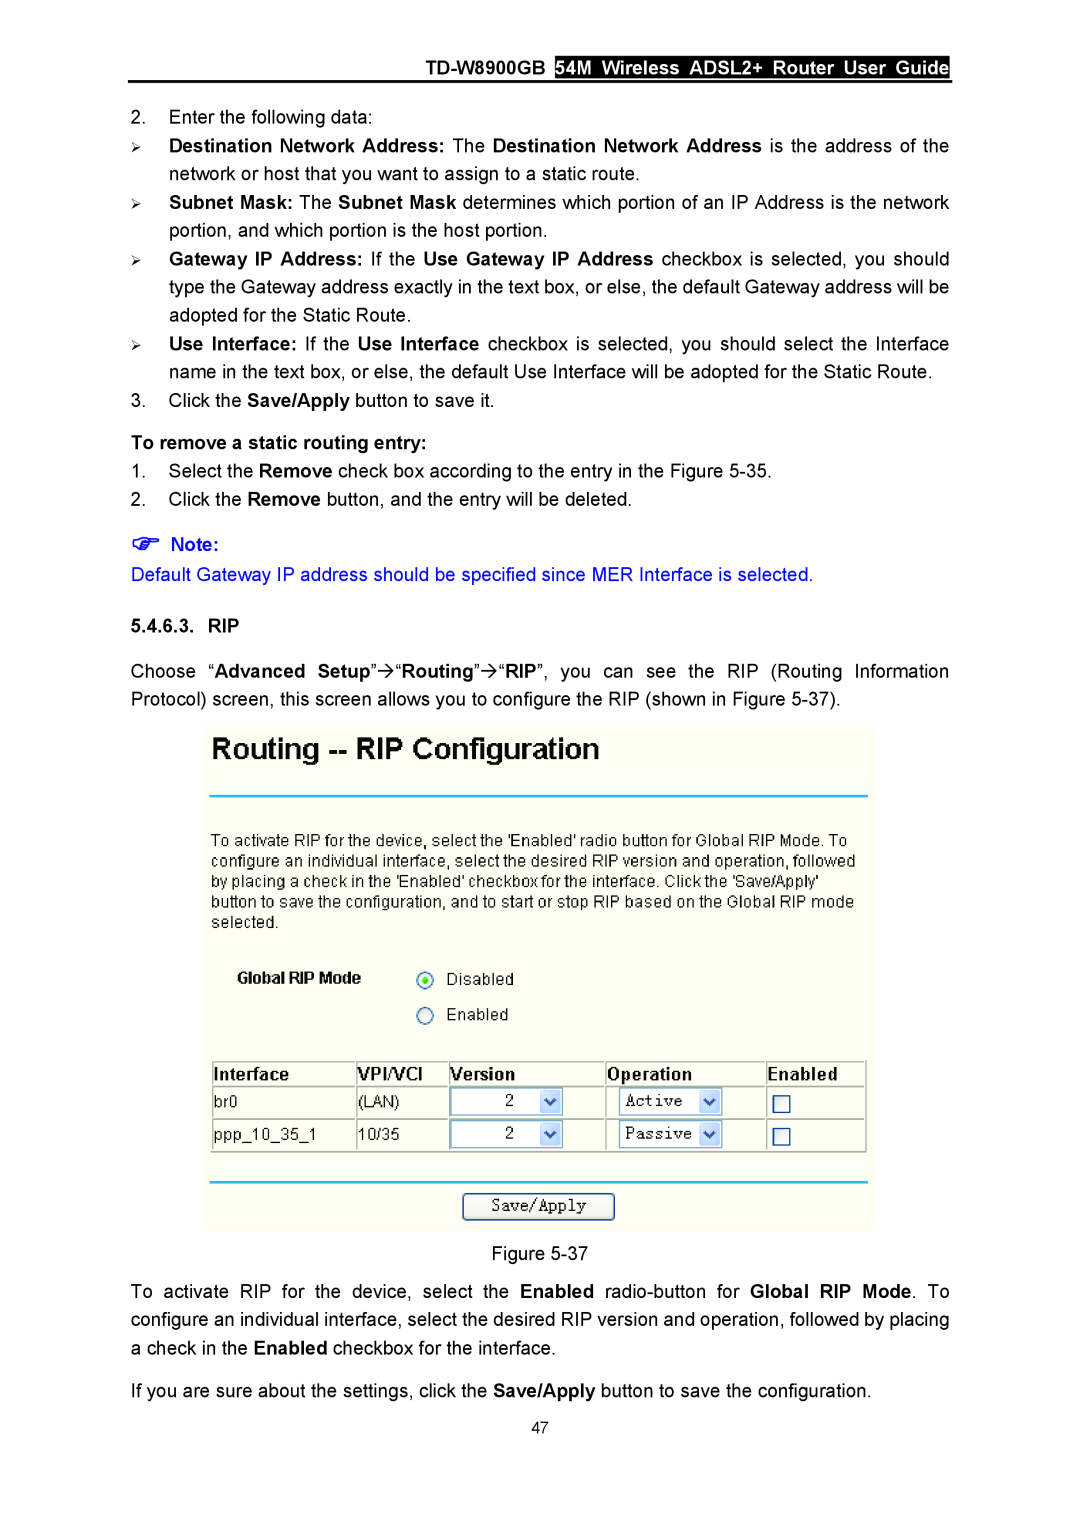 TP-Link manual TD-W8900GB 54M Wireless ADSL2+ Router User Guide, To remove a static routing entry, Rip 